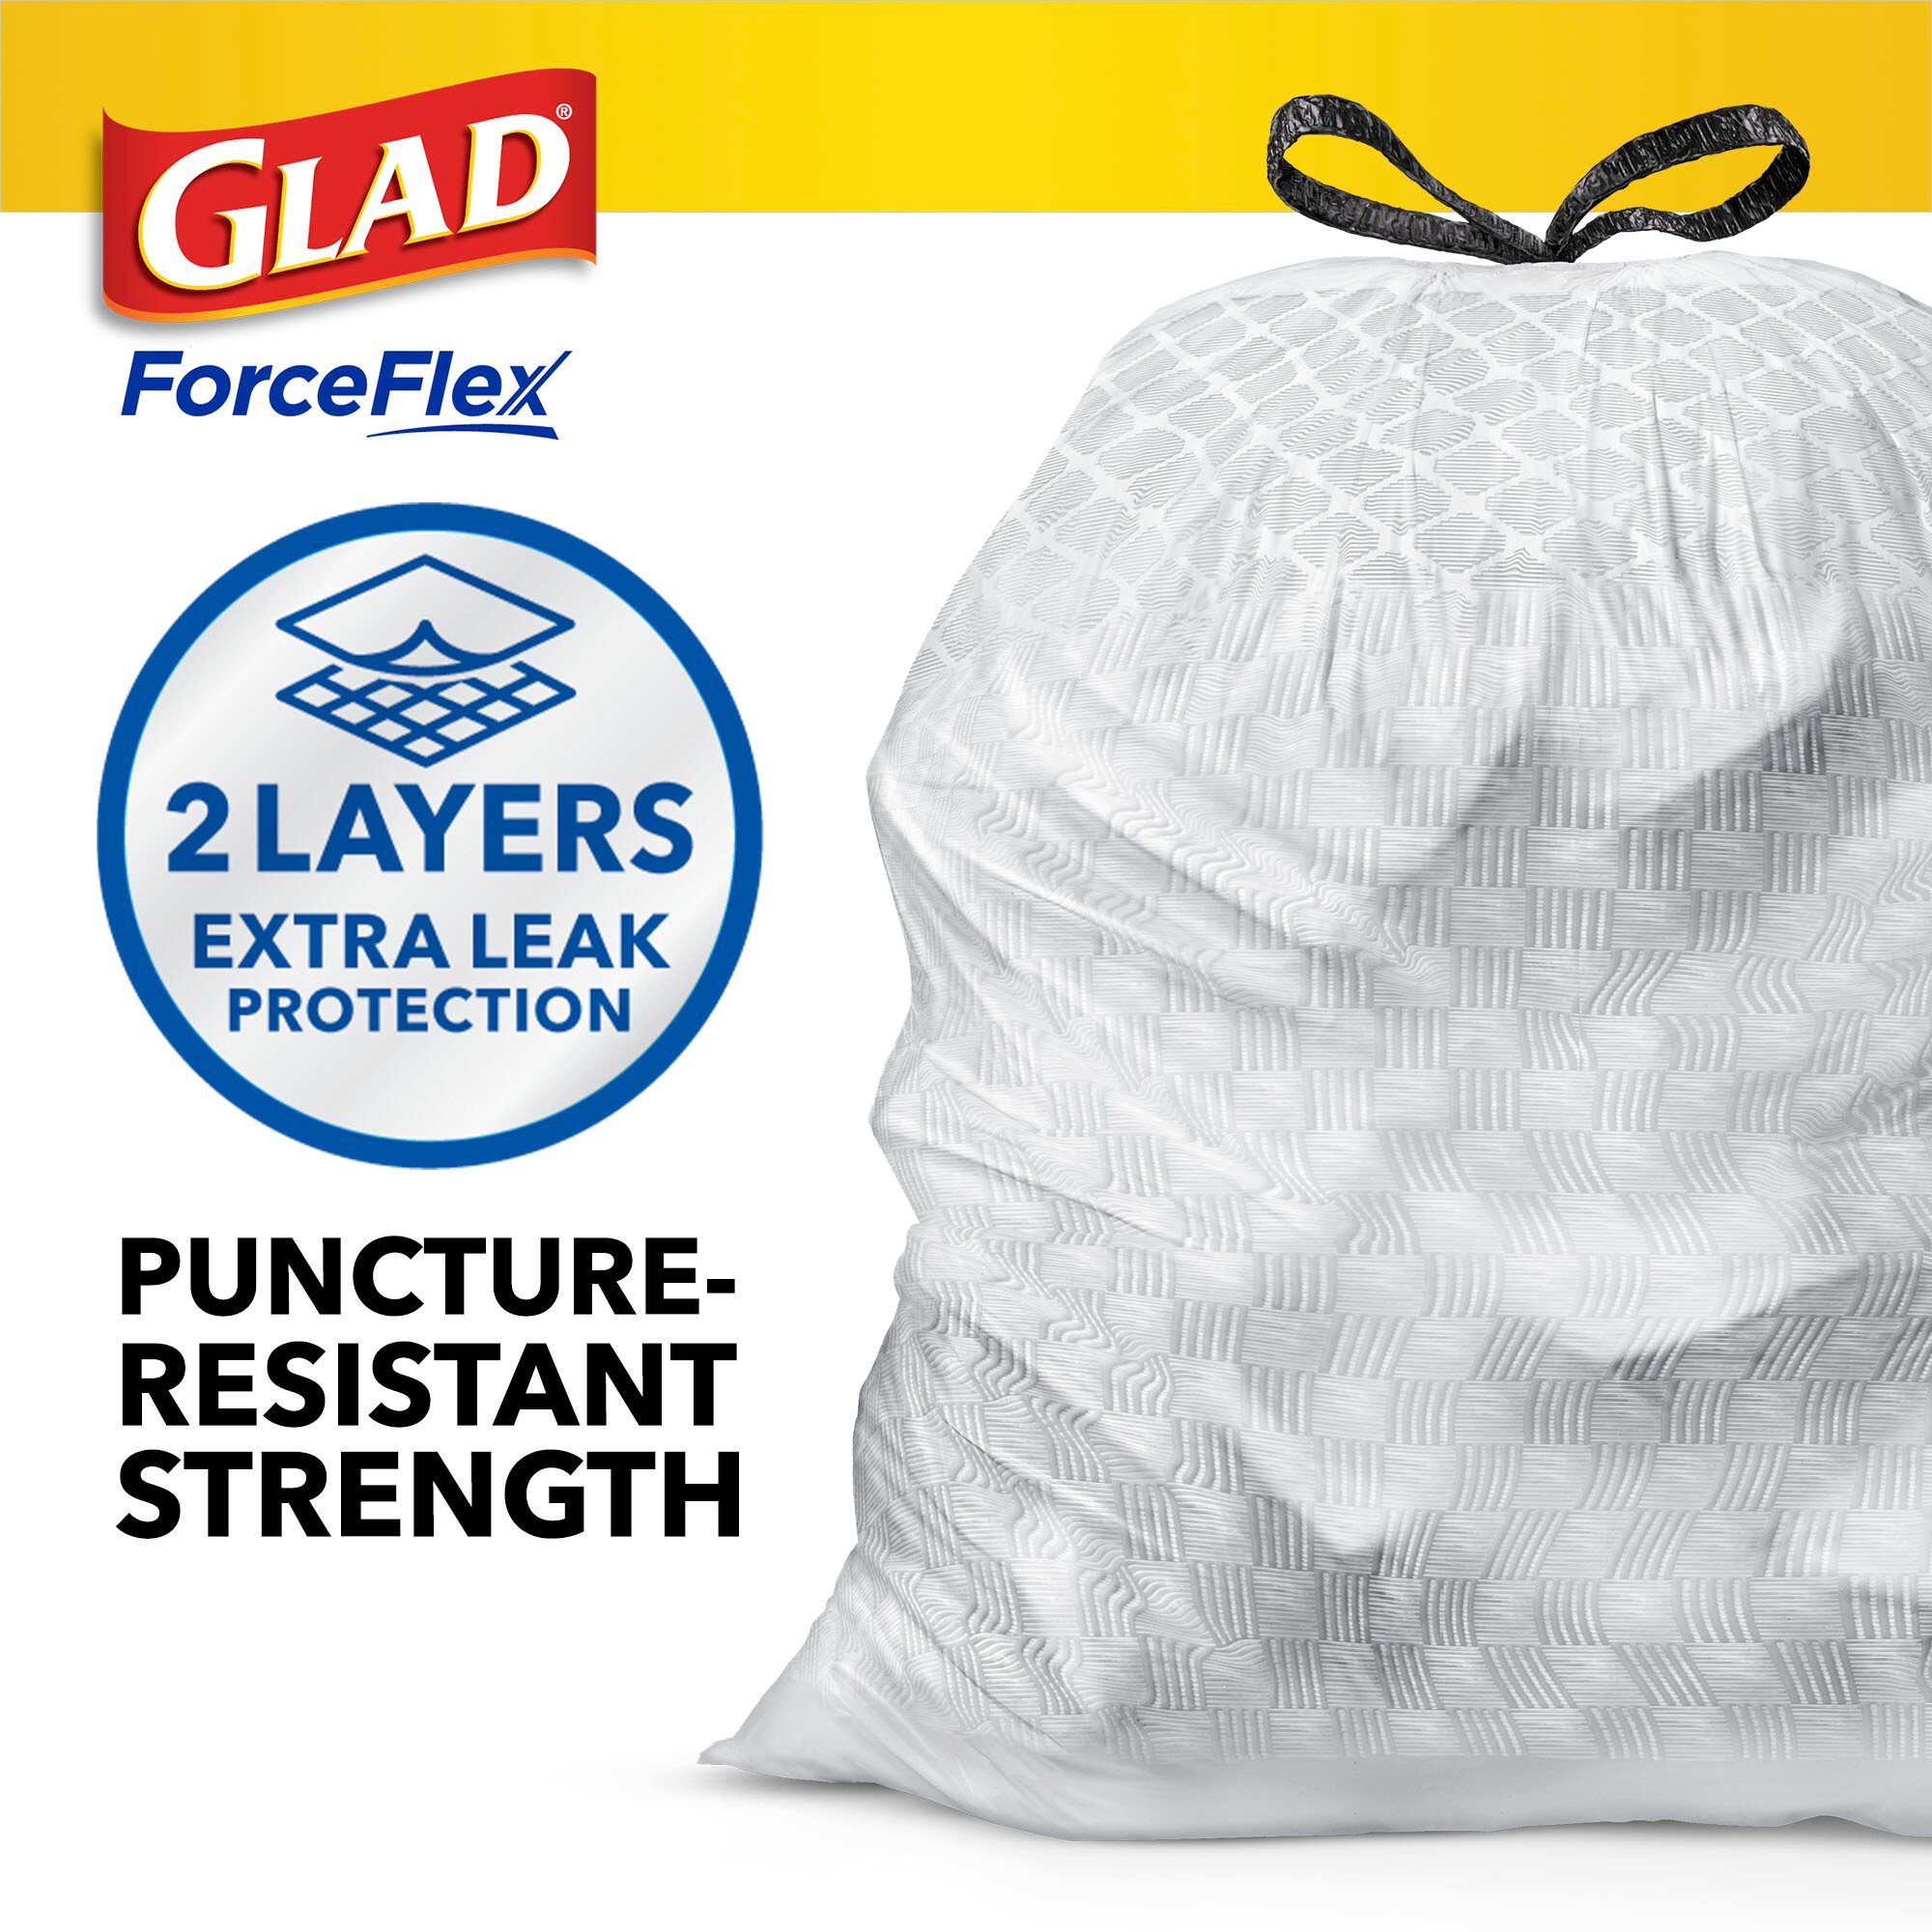 Glad ForceFlex MaxStrength with Febreze Cherry Blossom Scent Tall